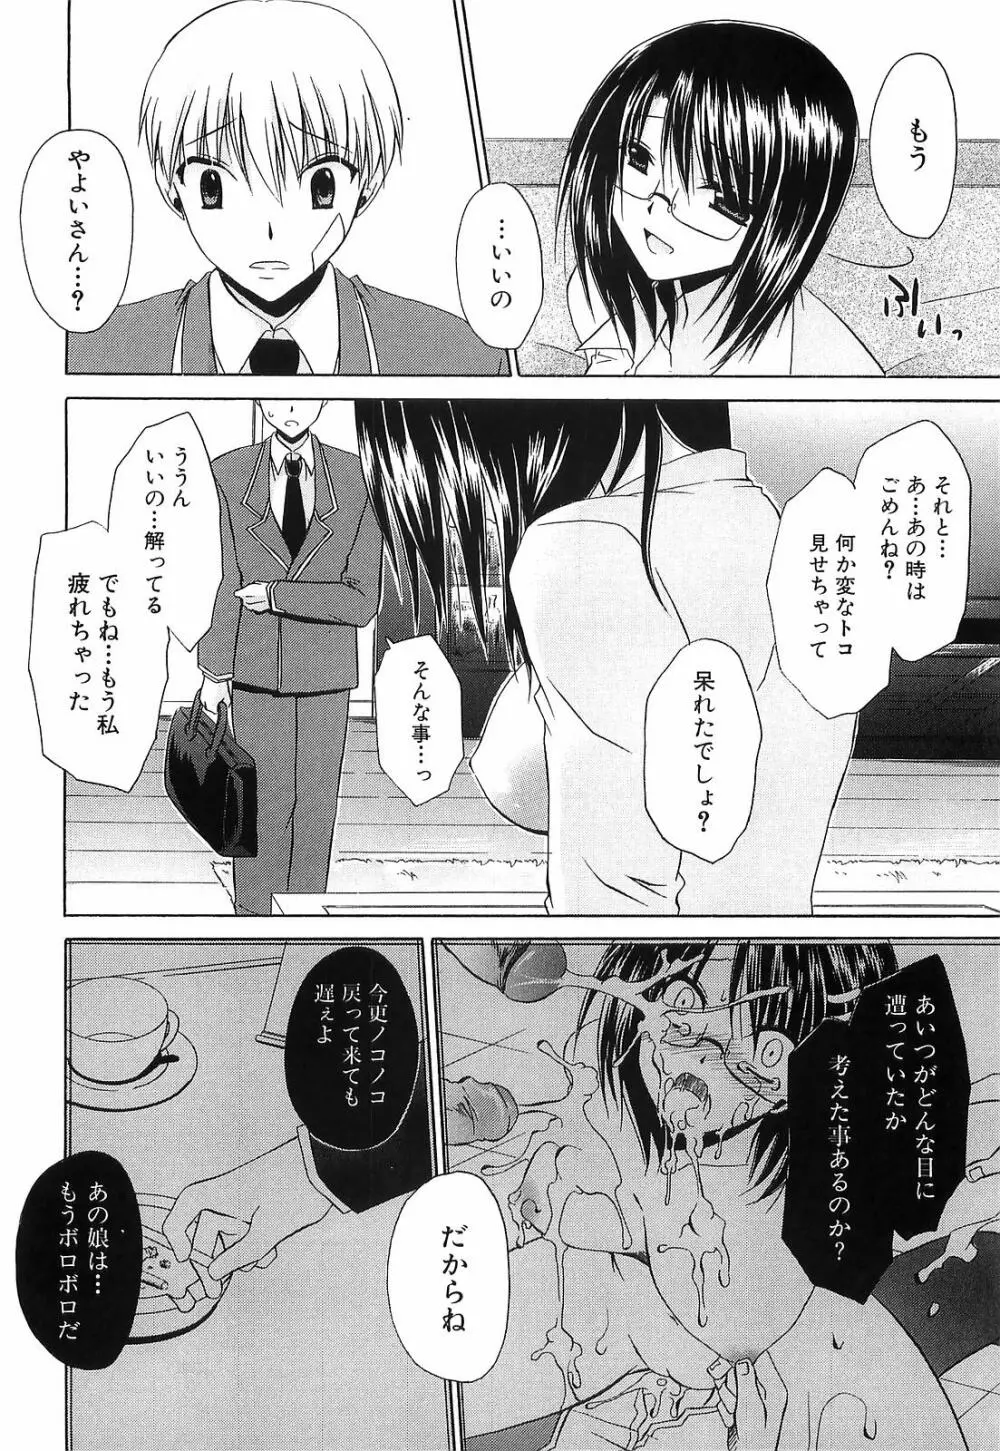 LOVE & HATE 3 FINAL～ENGAGE～通常版 Page.151